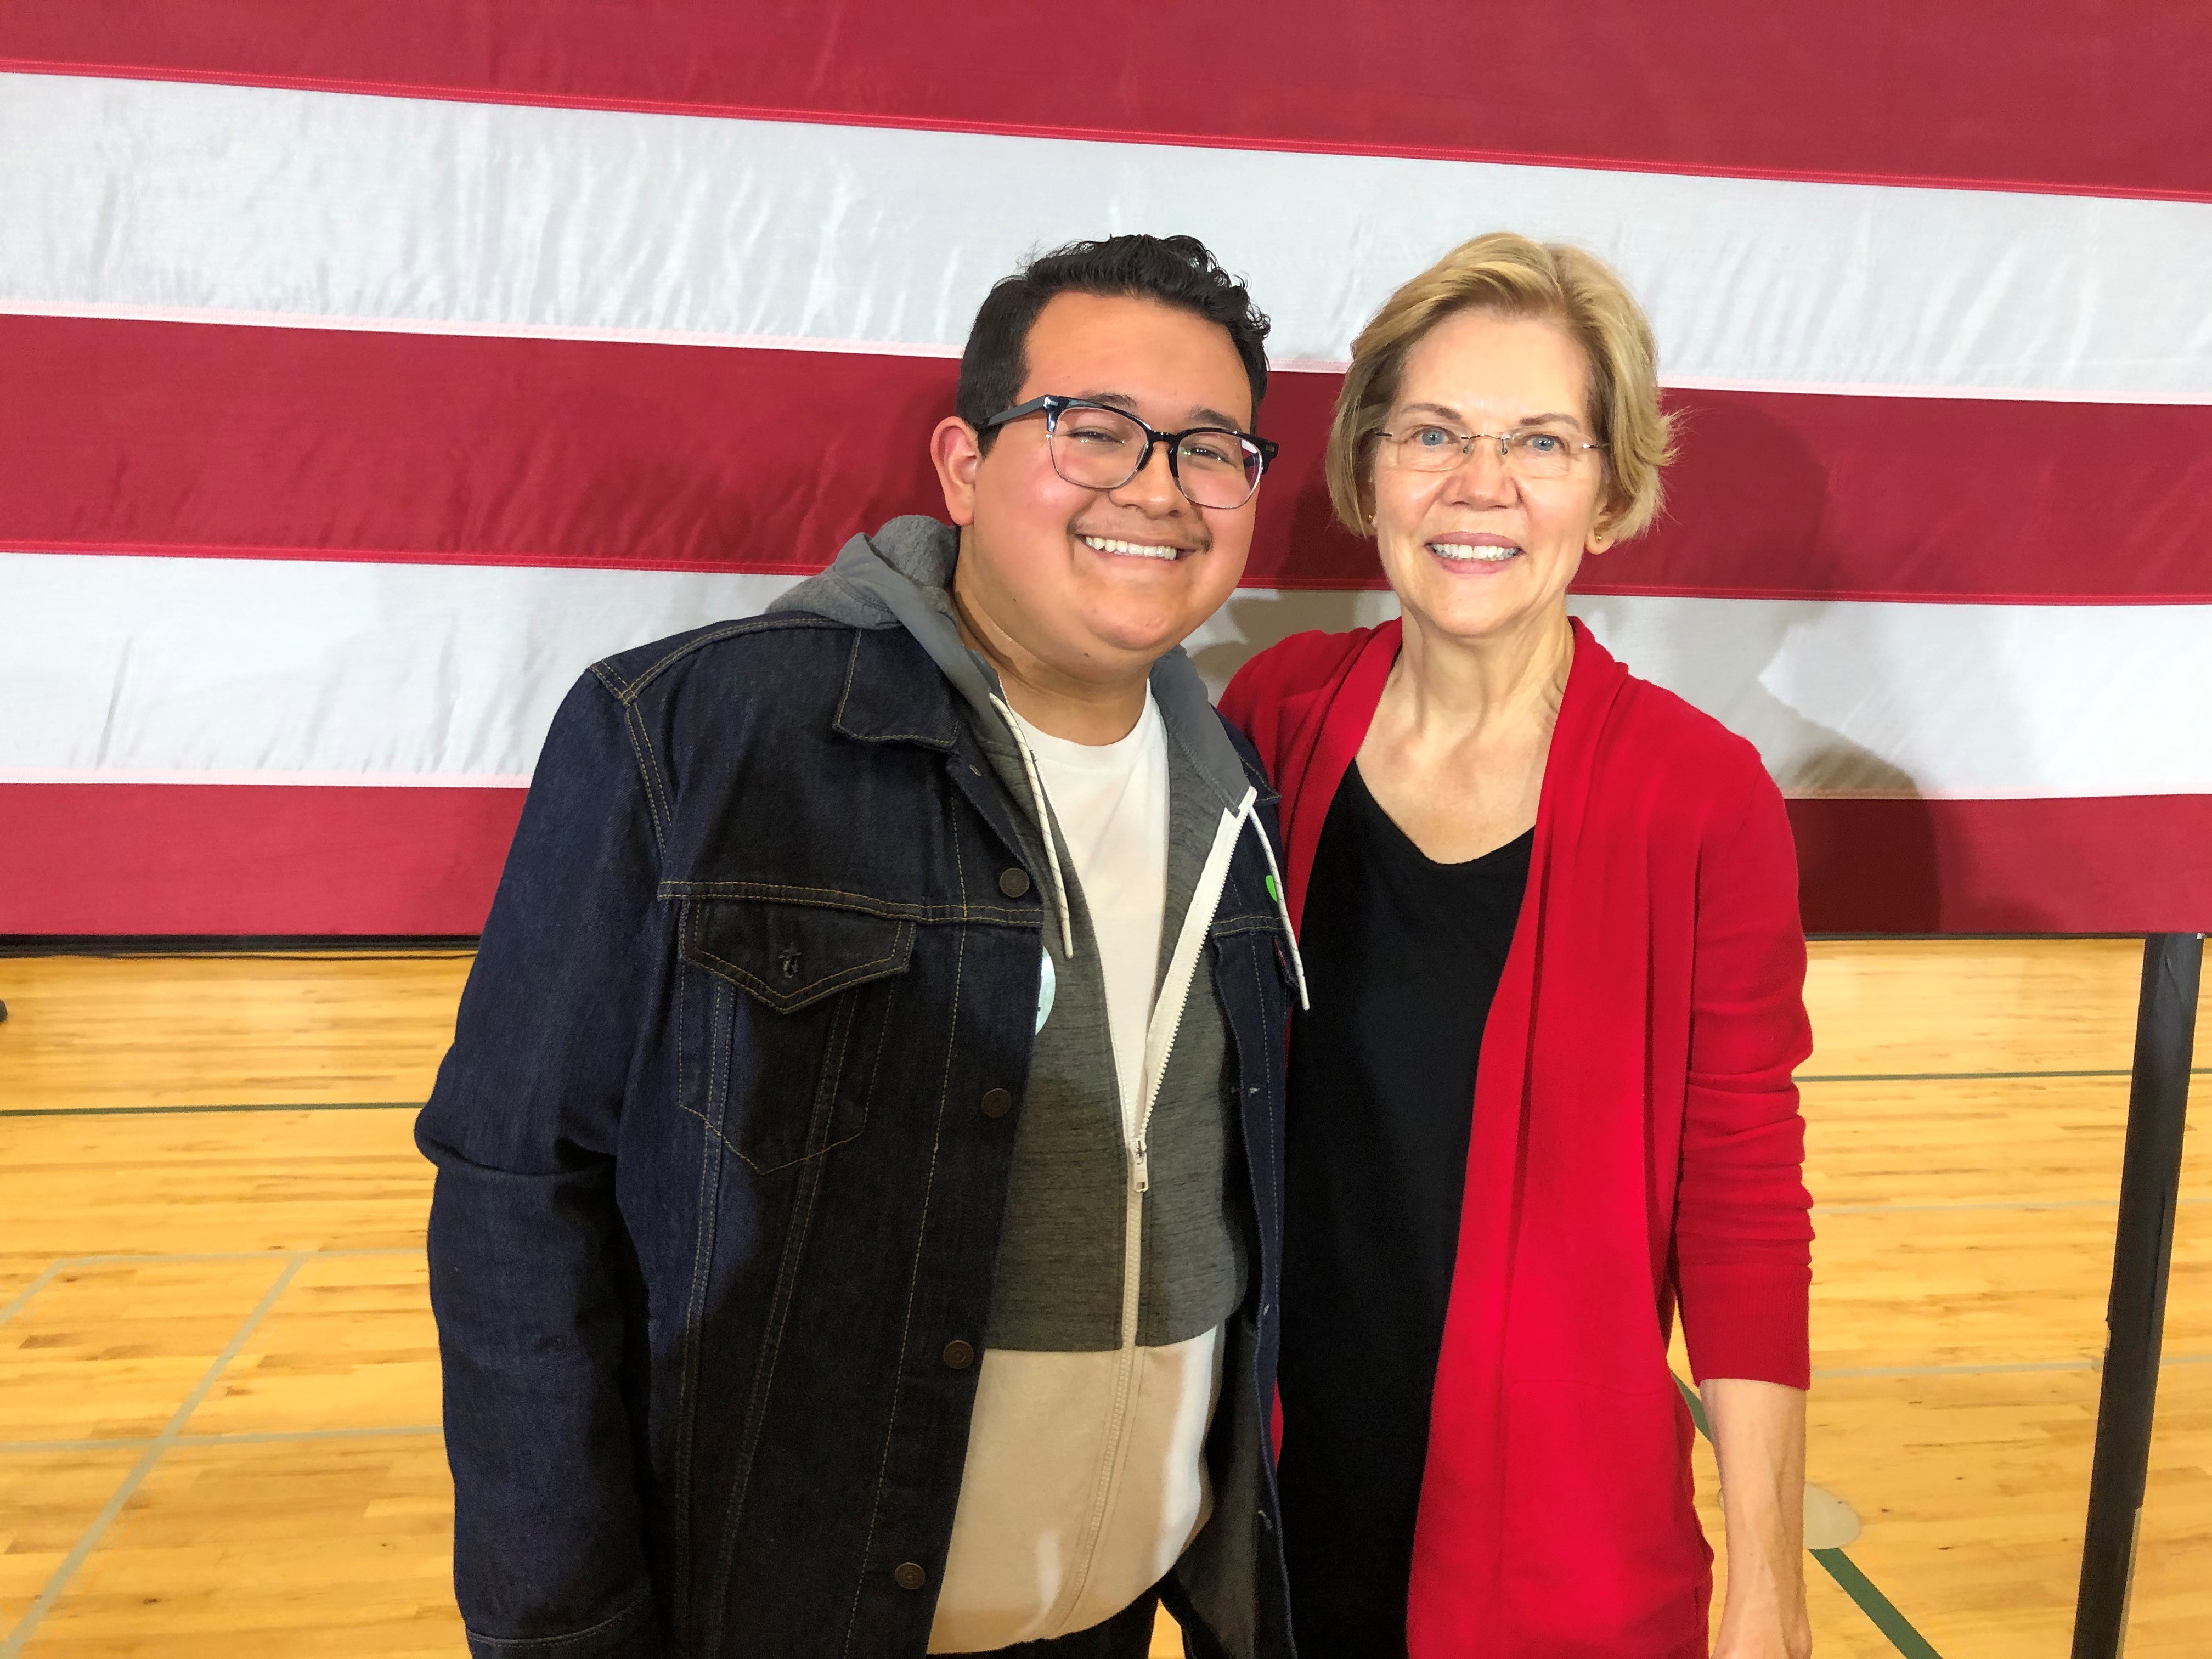 Heres me with Senator Warren who is running for president!